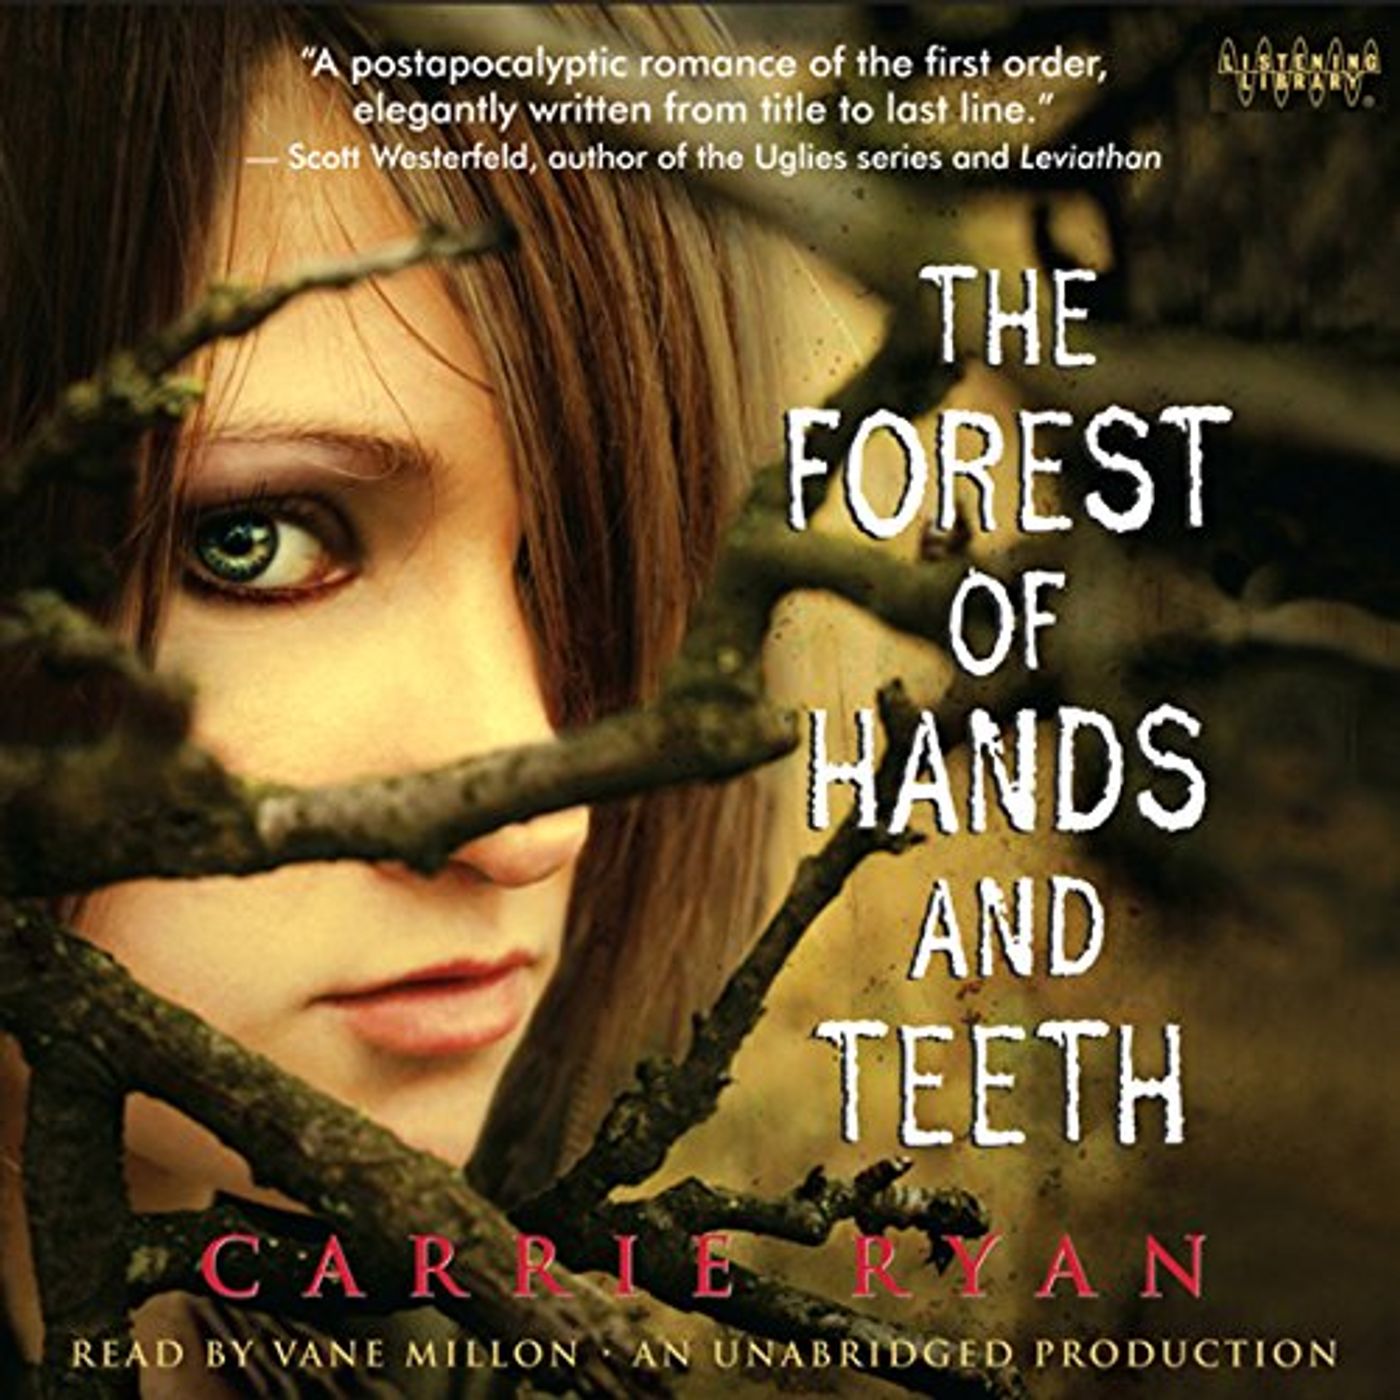 Chapter 2 "The Forest of Hands and Teeth" by Carrie Ryan